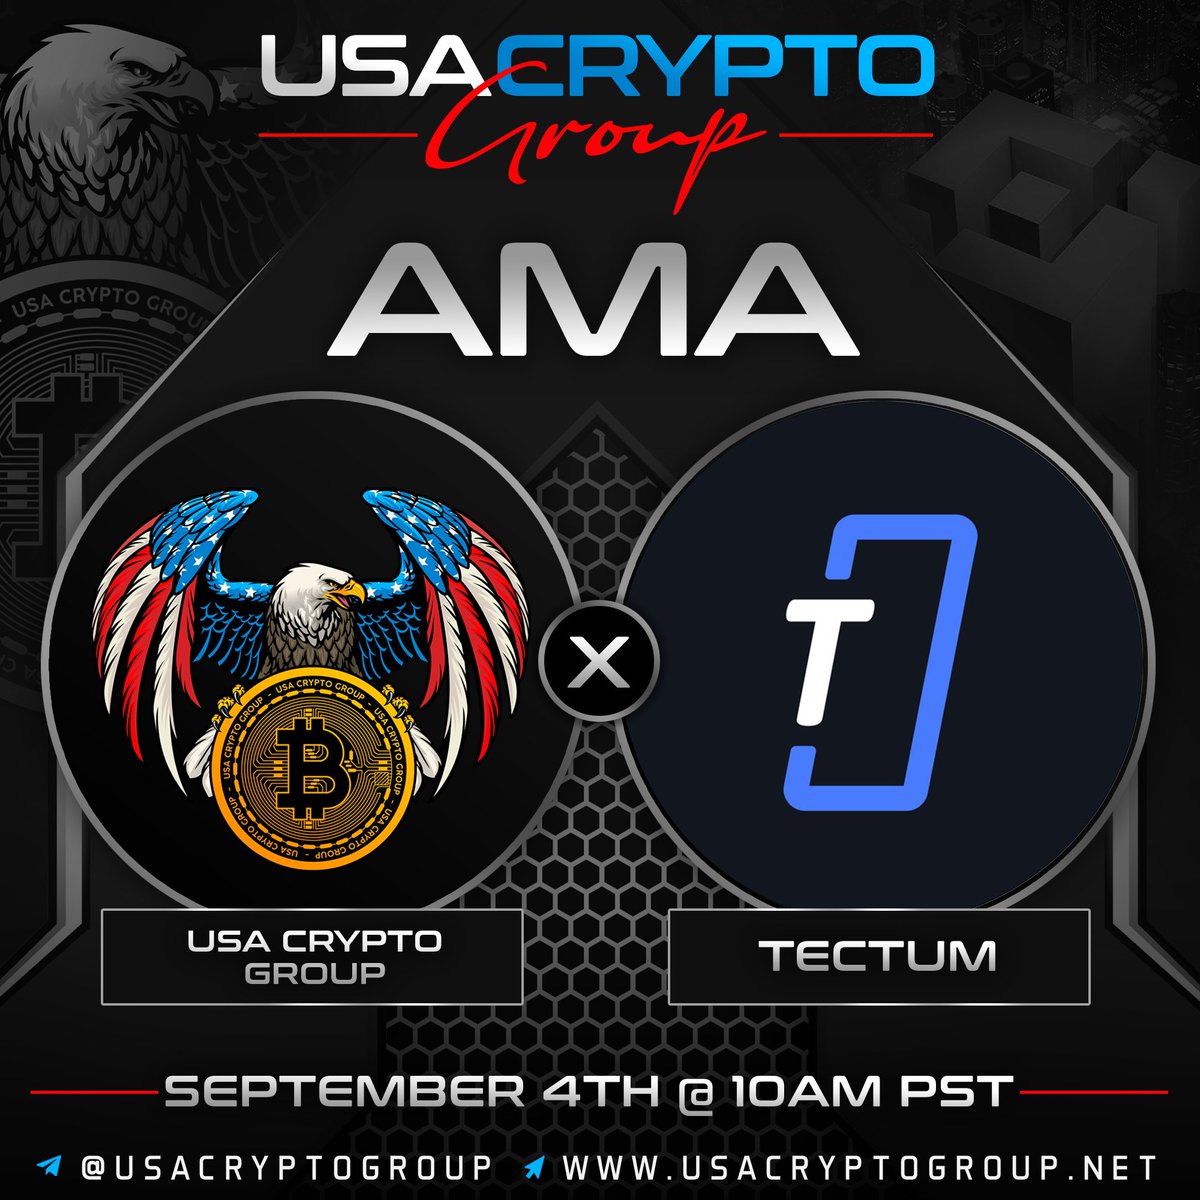 Venue: Tectum AMA Prize: $80 total Location: t.me/UsaCryptoGroup Twitter Cash Price: $25 Rules: -Follow @UsaCryptoGroup @tectumsocial -Like, Comment (can do AMA questions) and RT this post -Prize will be announced after the AMA